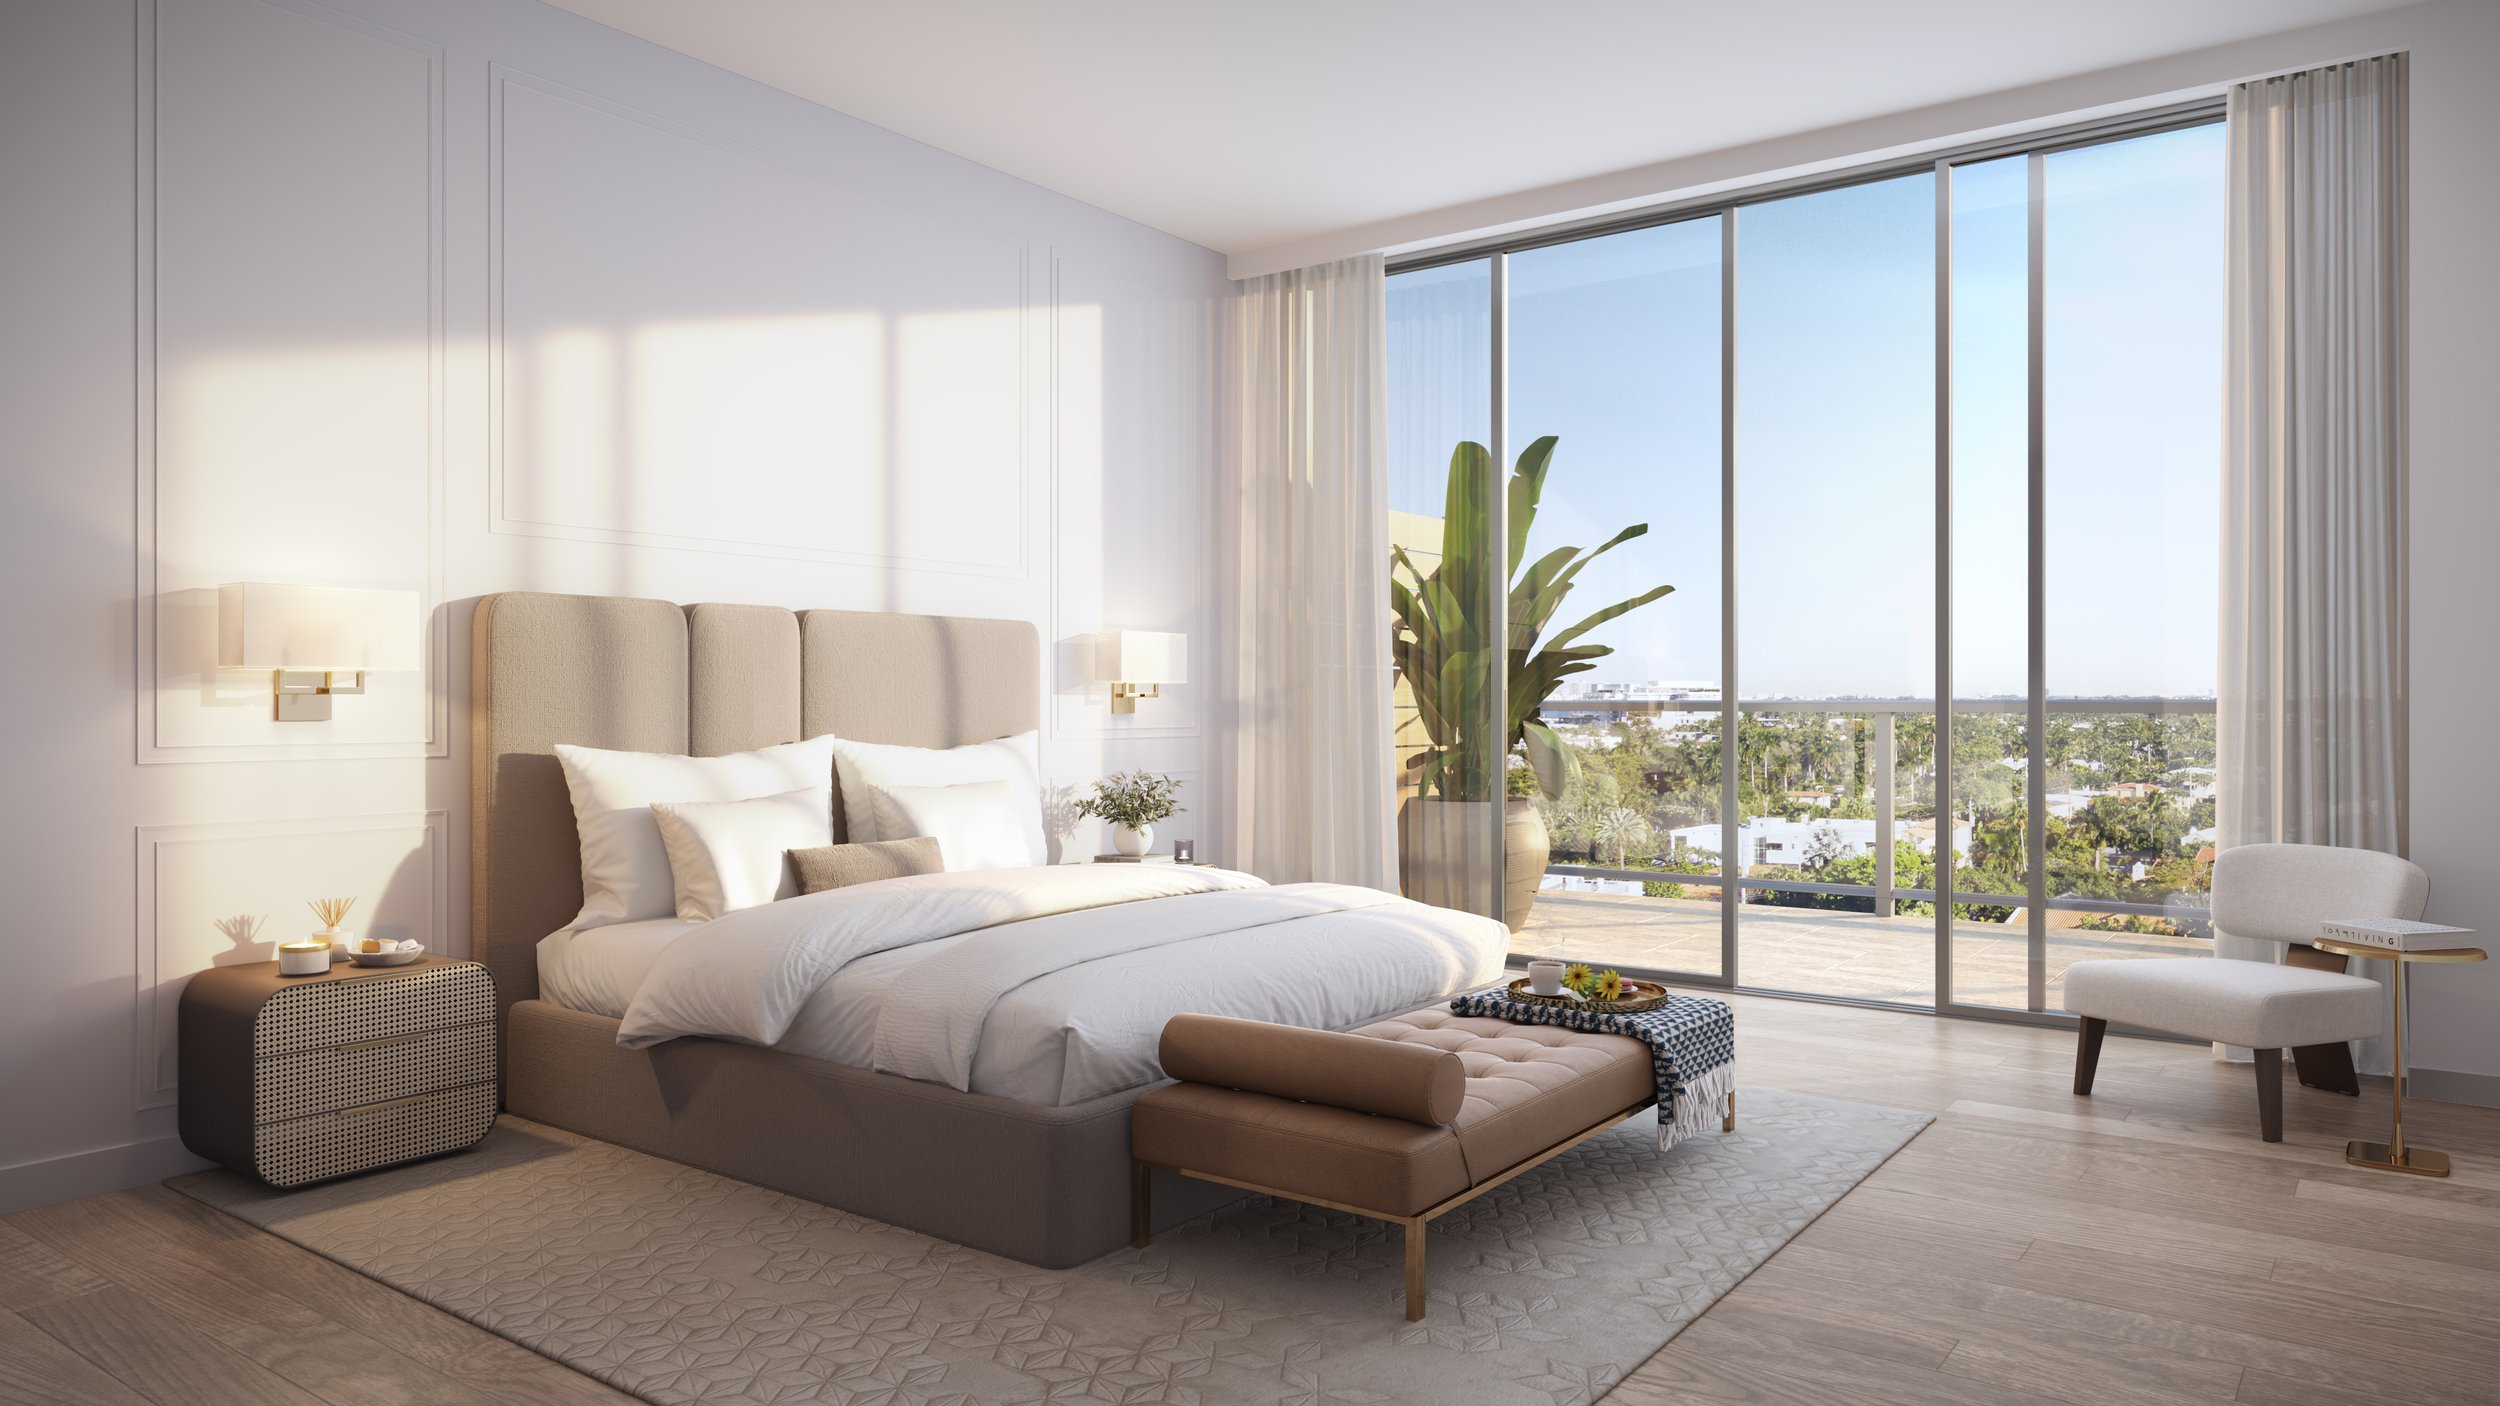 Arquitectonica-Designed Boutique Condo 42 Pine Launches Sales On Miami Beach's Pine Tree Drive And 41st Street2.jpg